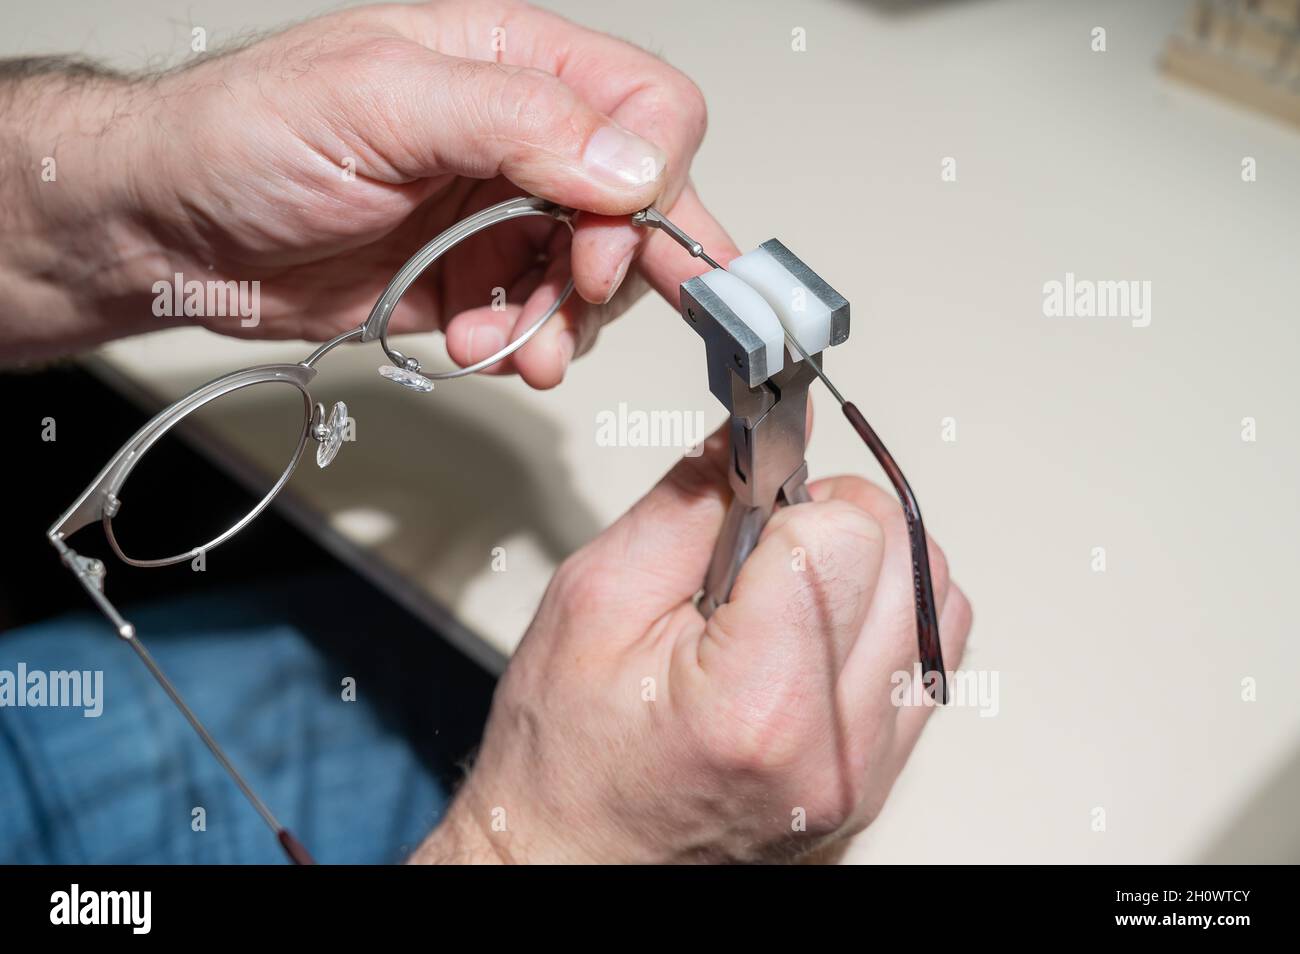 The man bends the temples of his glasses. The master repairs the frame with tongs. Stock Photo